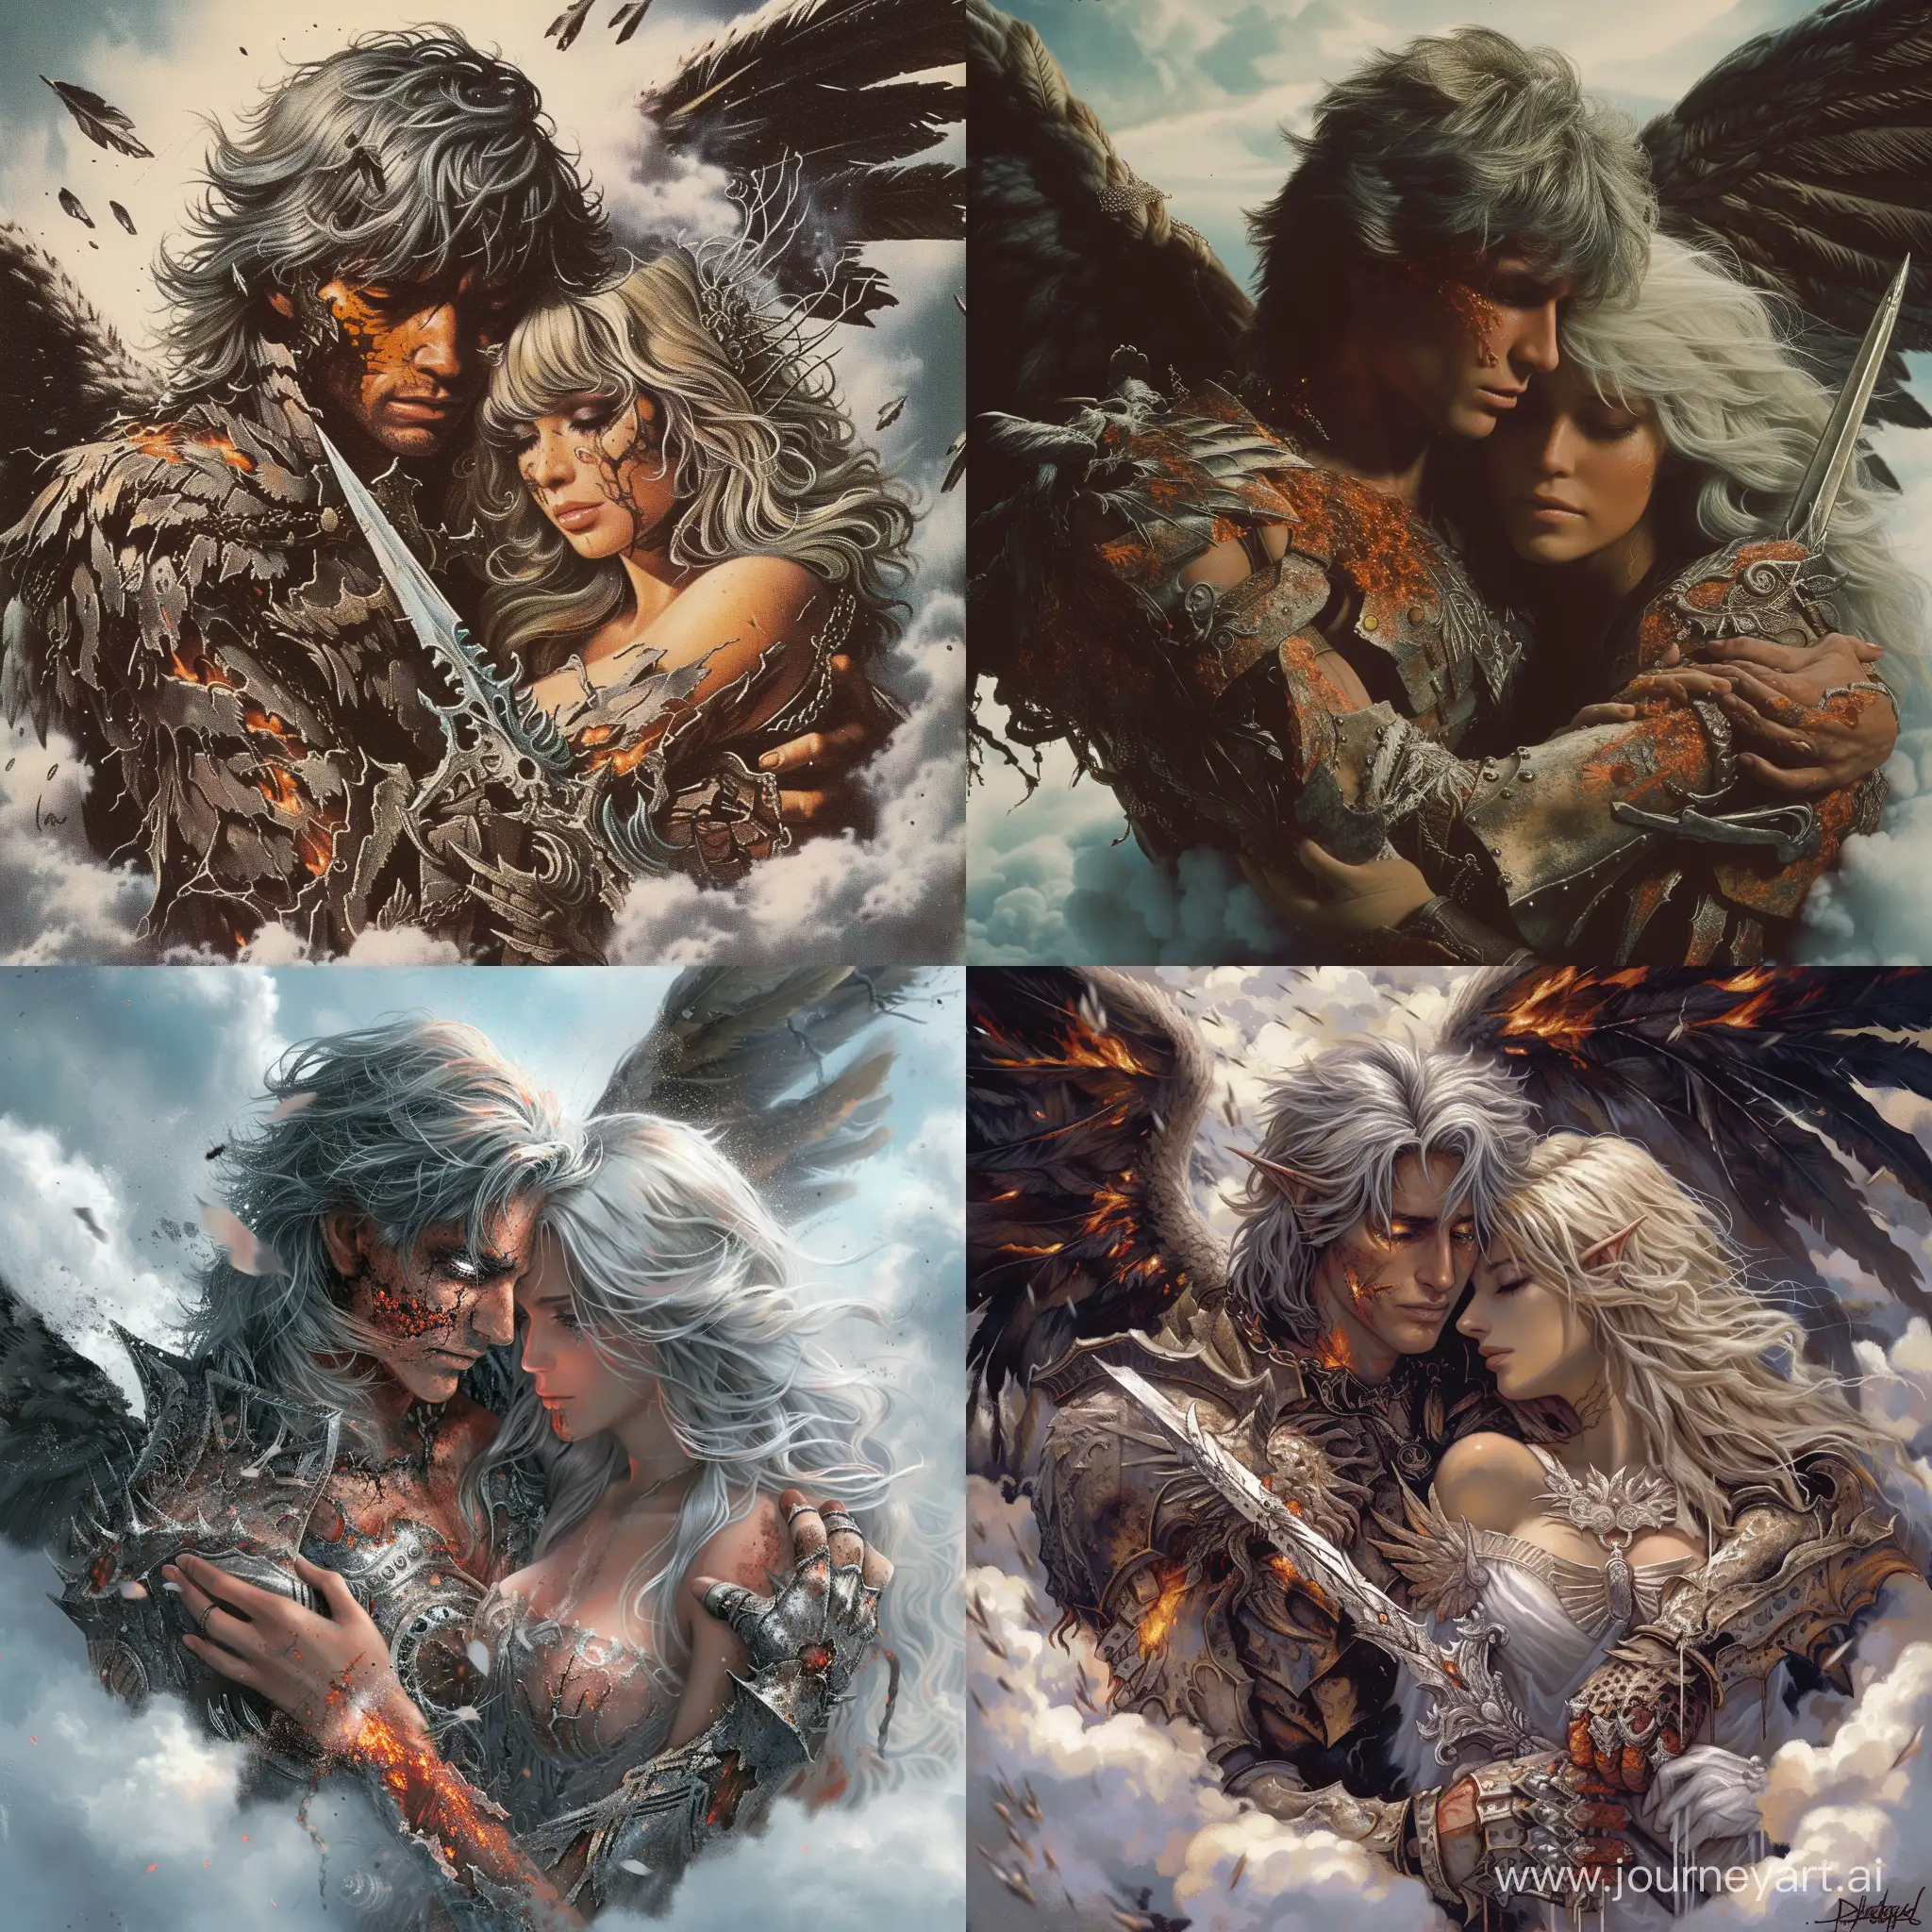 A fallen angel man with tattered, charred wings and smoldering silver hair, Eyes that glow with ethereal sadness, reflecting the pain of betrayal, Wears shattered and scorched divine armor, carrying a blade infused with both heavenly and infernal energies, being clutched peacefully by a beautiful woman angel wearing a divine armor, in a bed of clouds, 1970's dark fantasy style, grim dark, gritty, detailed